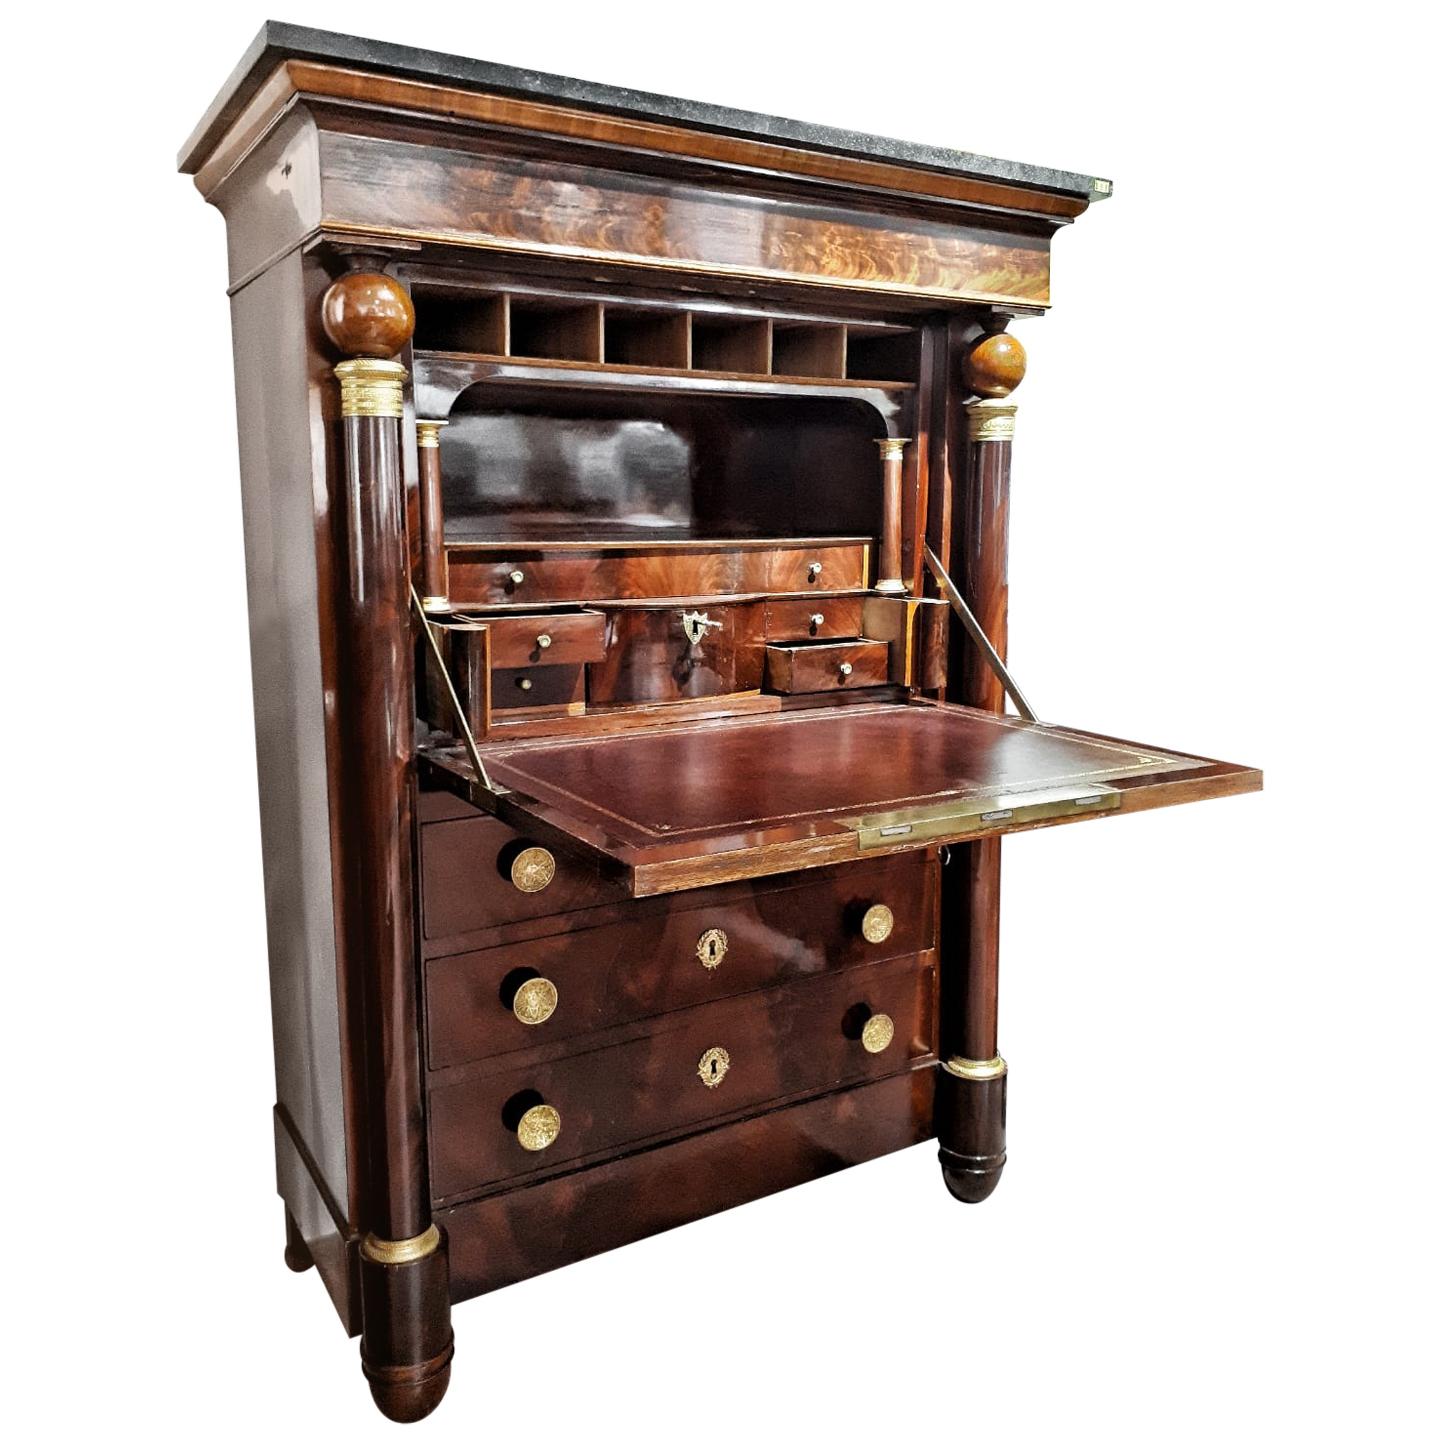 Early 19th Century Empire Flame Mahogany and Black Marble Secretaire  im Angebot